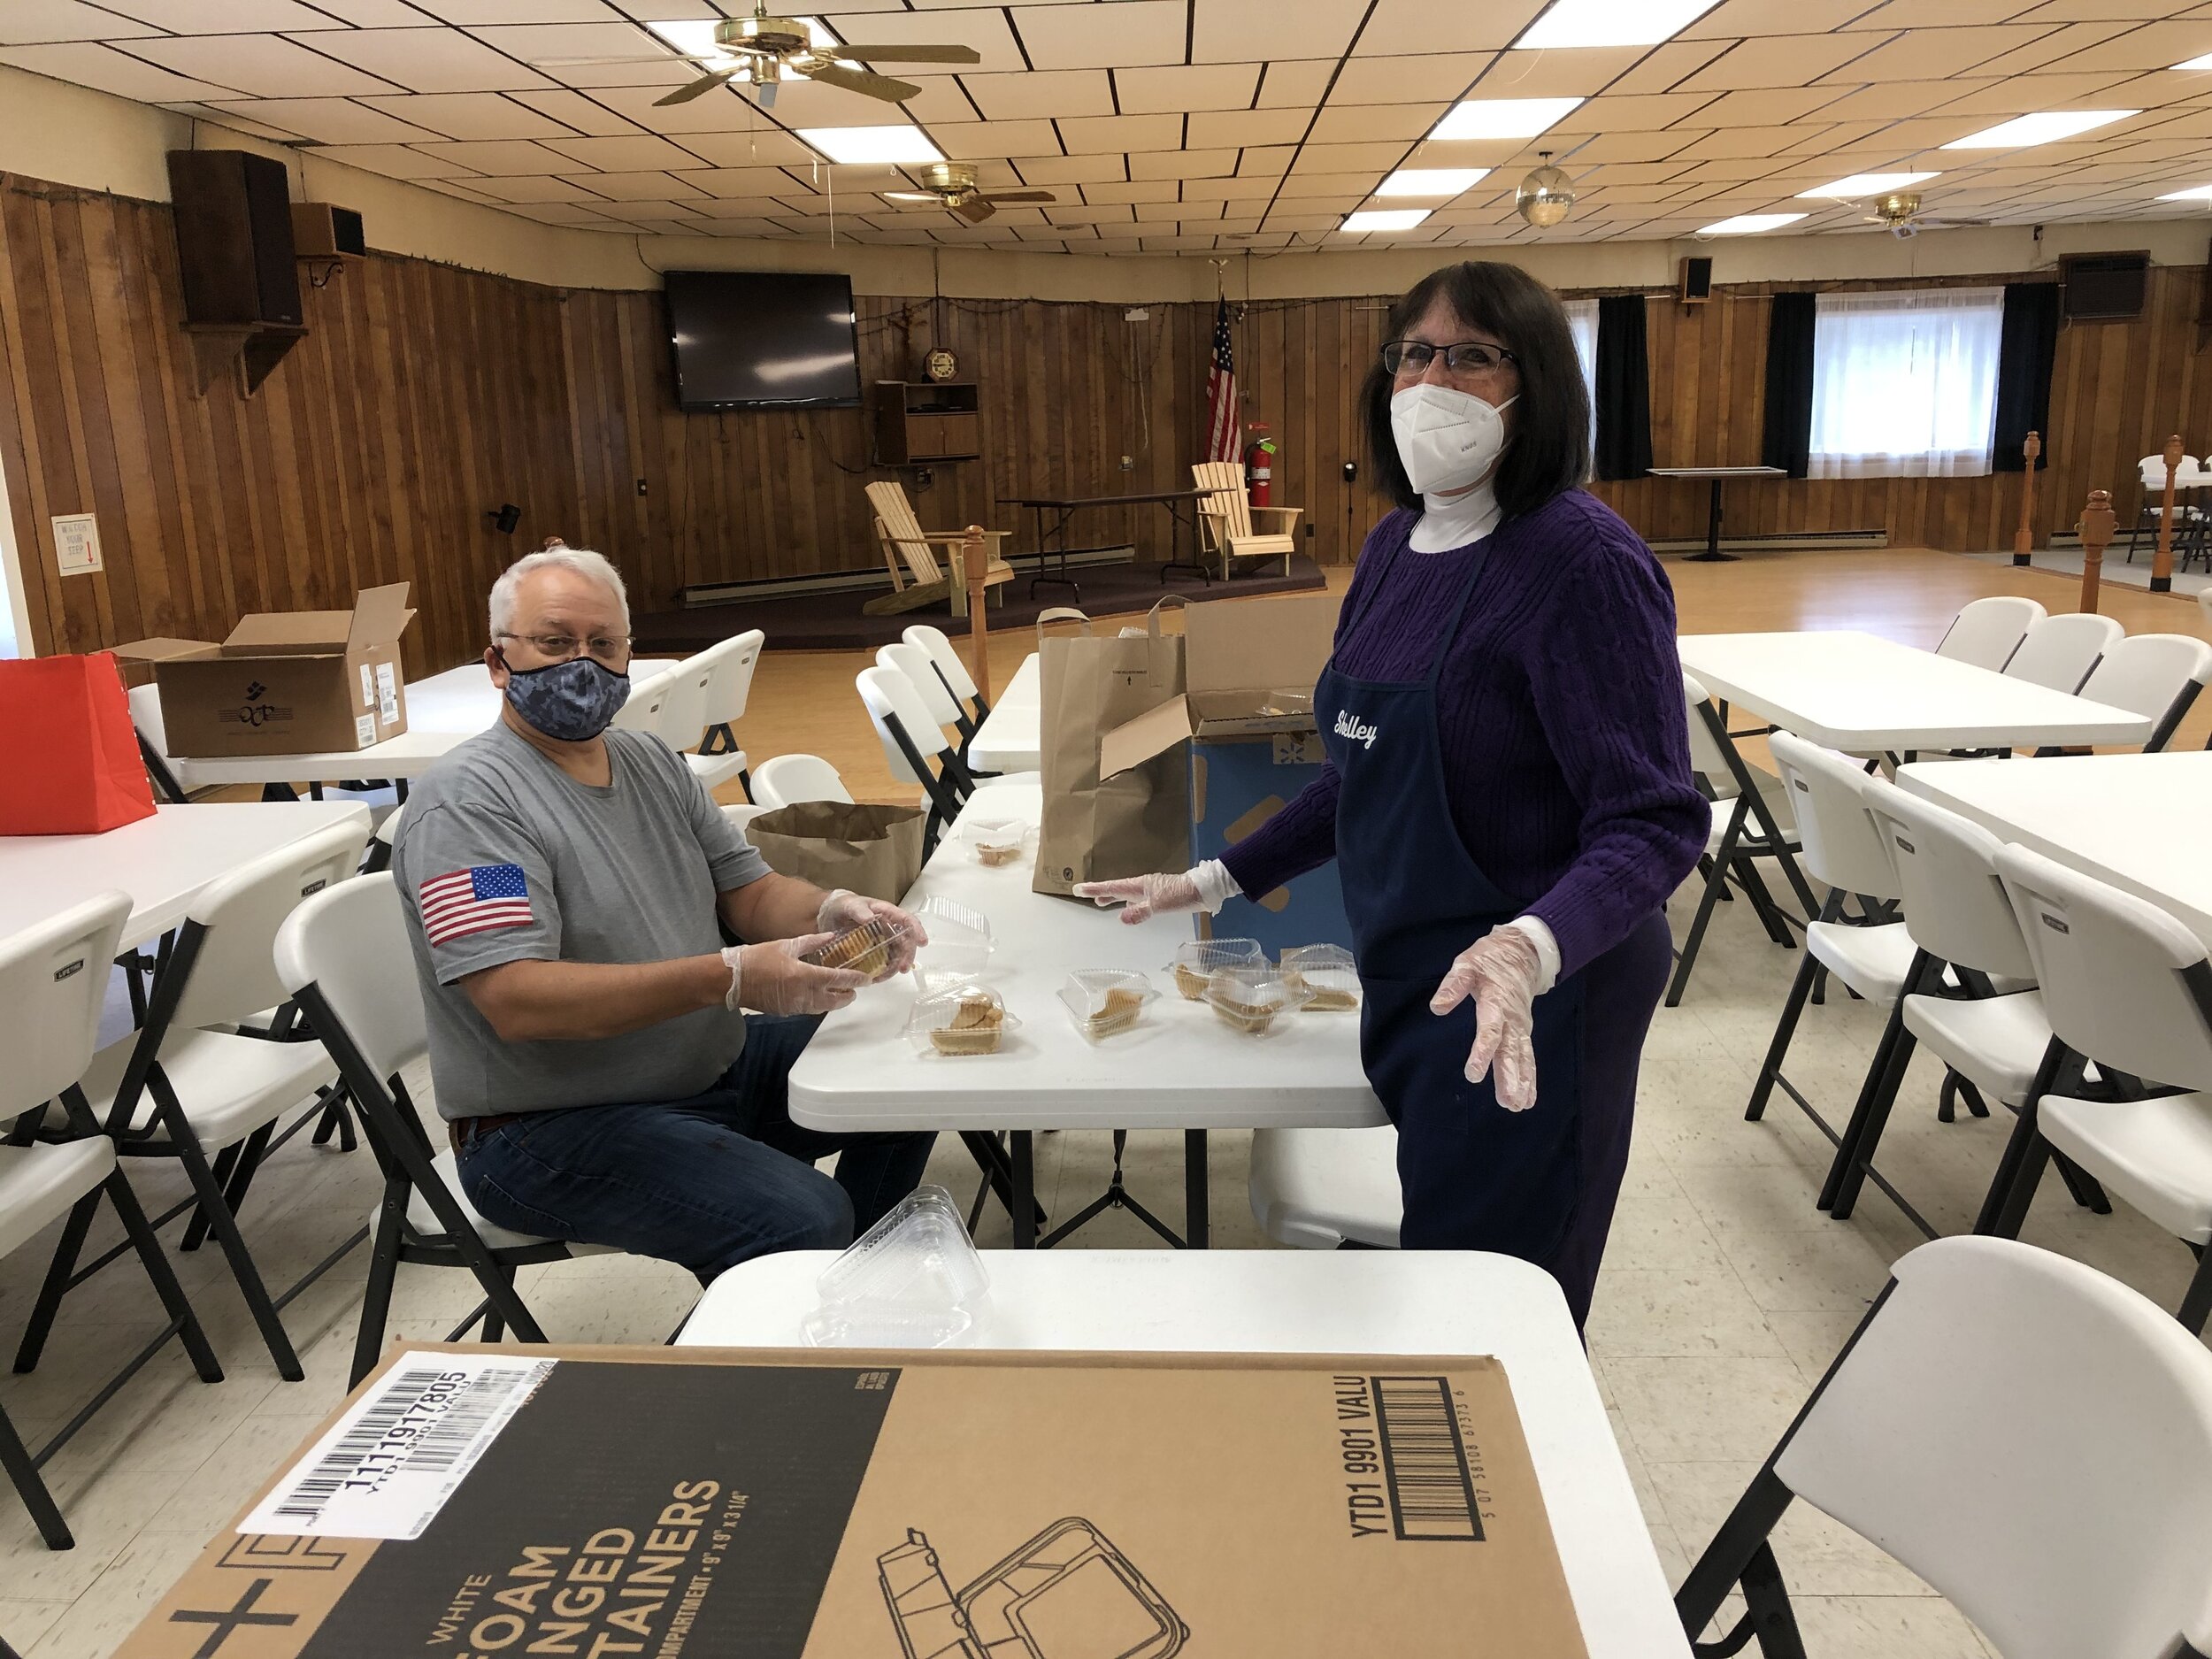    Knight Mark Moeller and volunteer Shelly Boushie were preparing pie portions before the deliveries began, among the many things they tackled that day.  